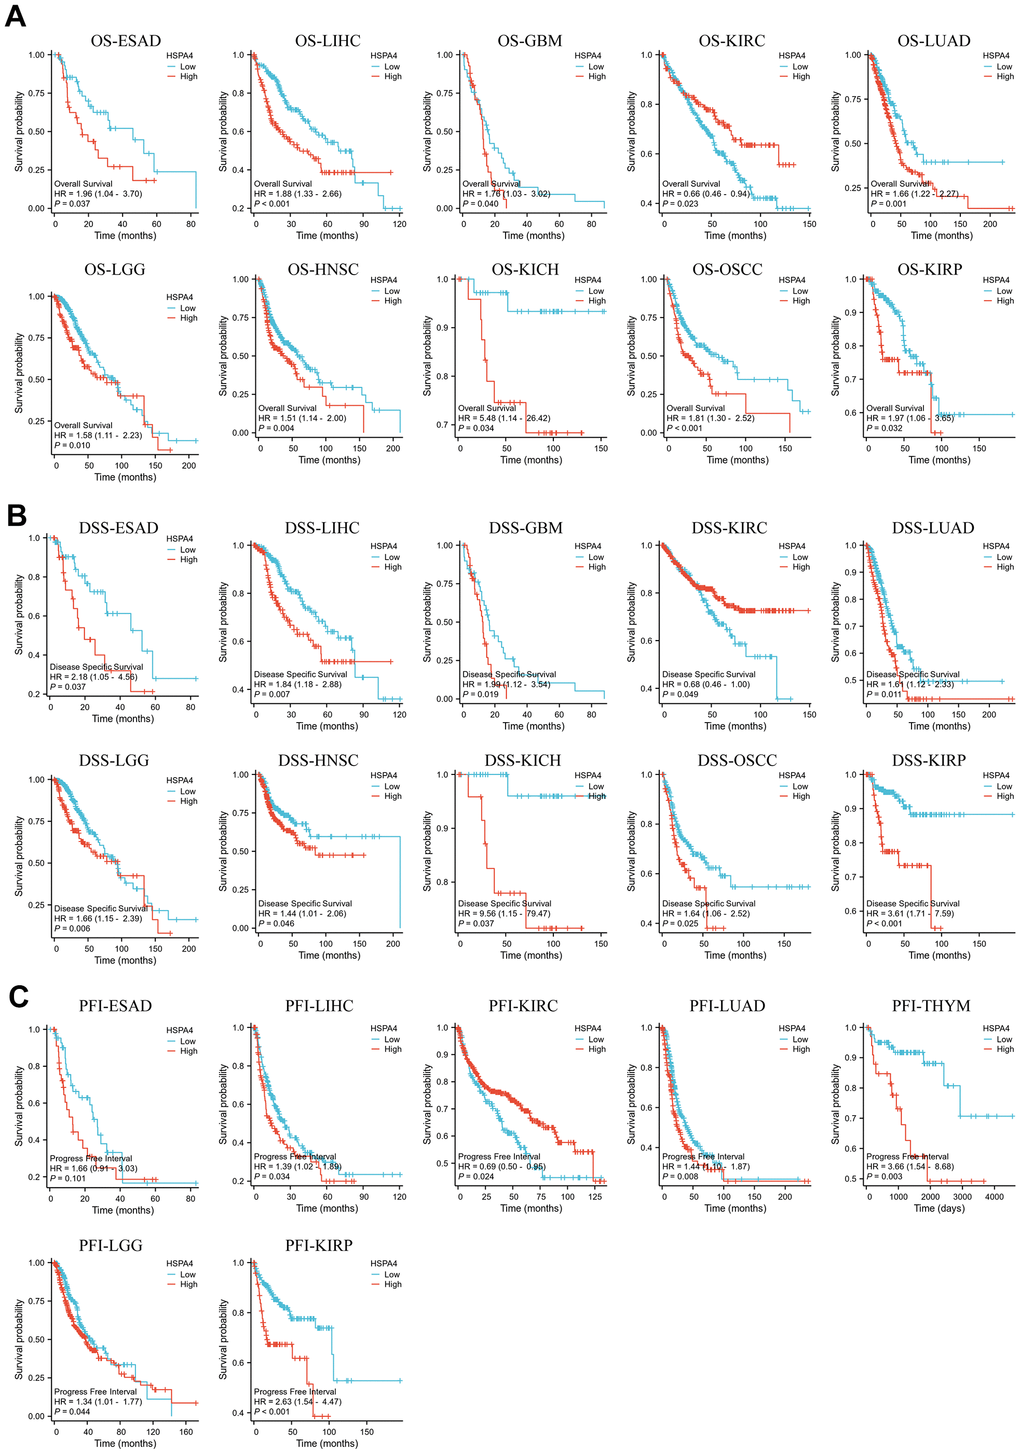 Survival prognosis analysis of cancers. (A) OS analysis of HSPA4 gene in the TCGA dataset. (B) DSS analysis of HSPA4 gene in TCGA database. (C) PFI analysis of HSPA4 gene in TCGA database.